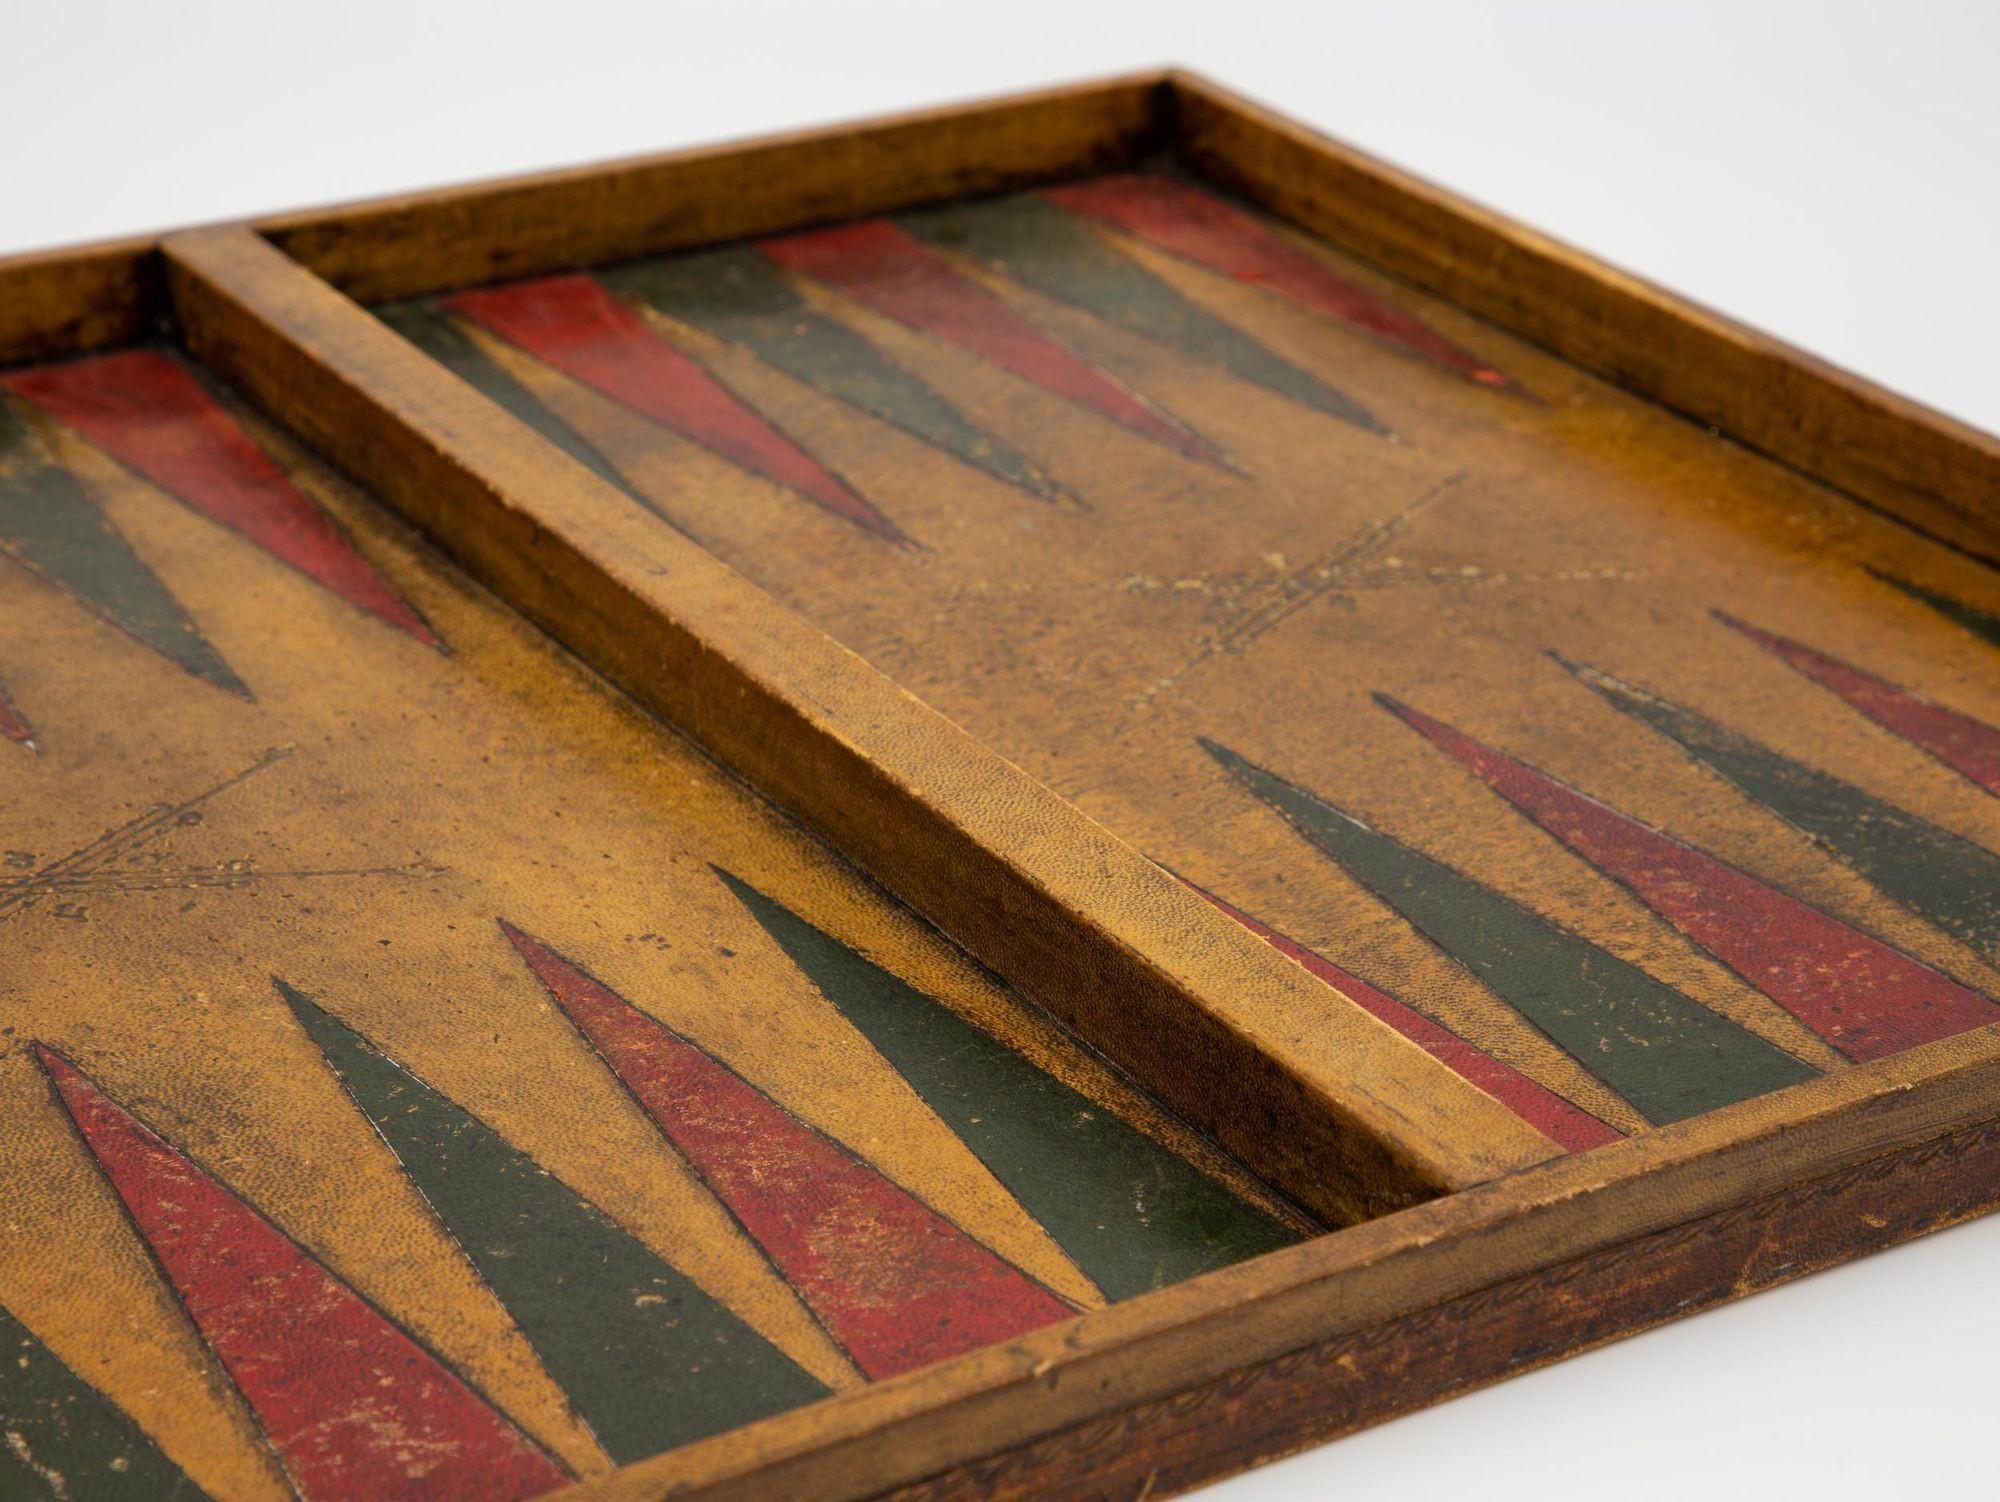 An early 20th century Backgammon game box. The interior is made of cognac, green, and red dyed leather. The exterior is embossed with a gold vine border. Wear consistent with age and use.